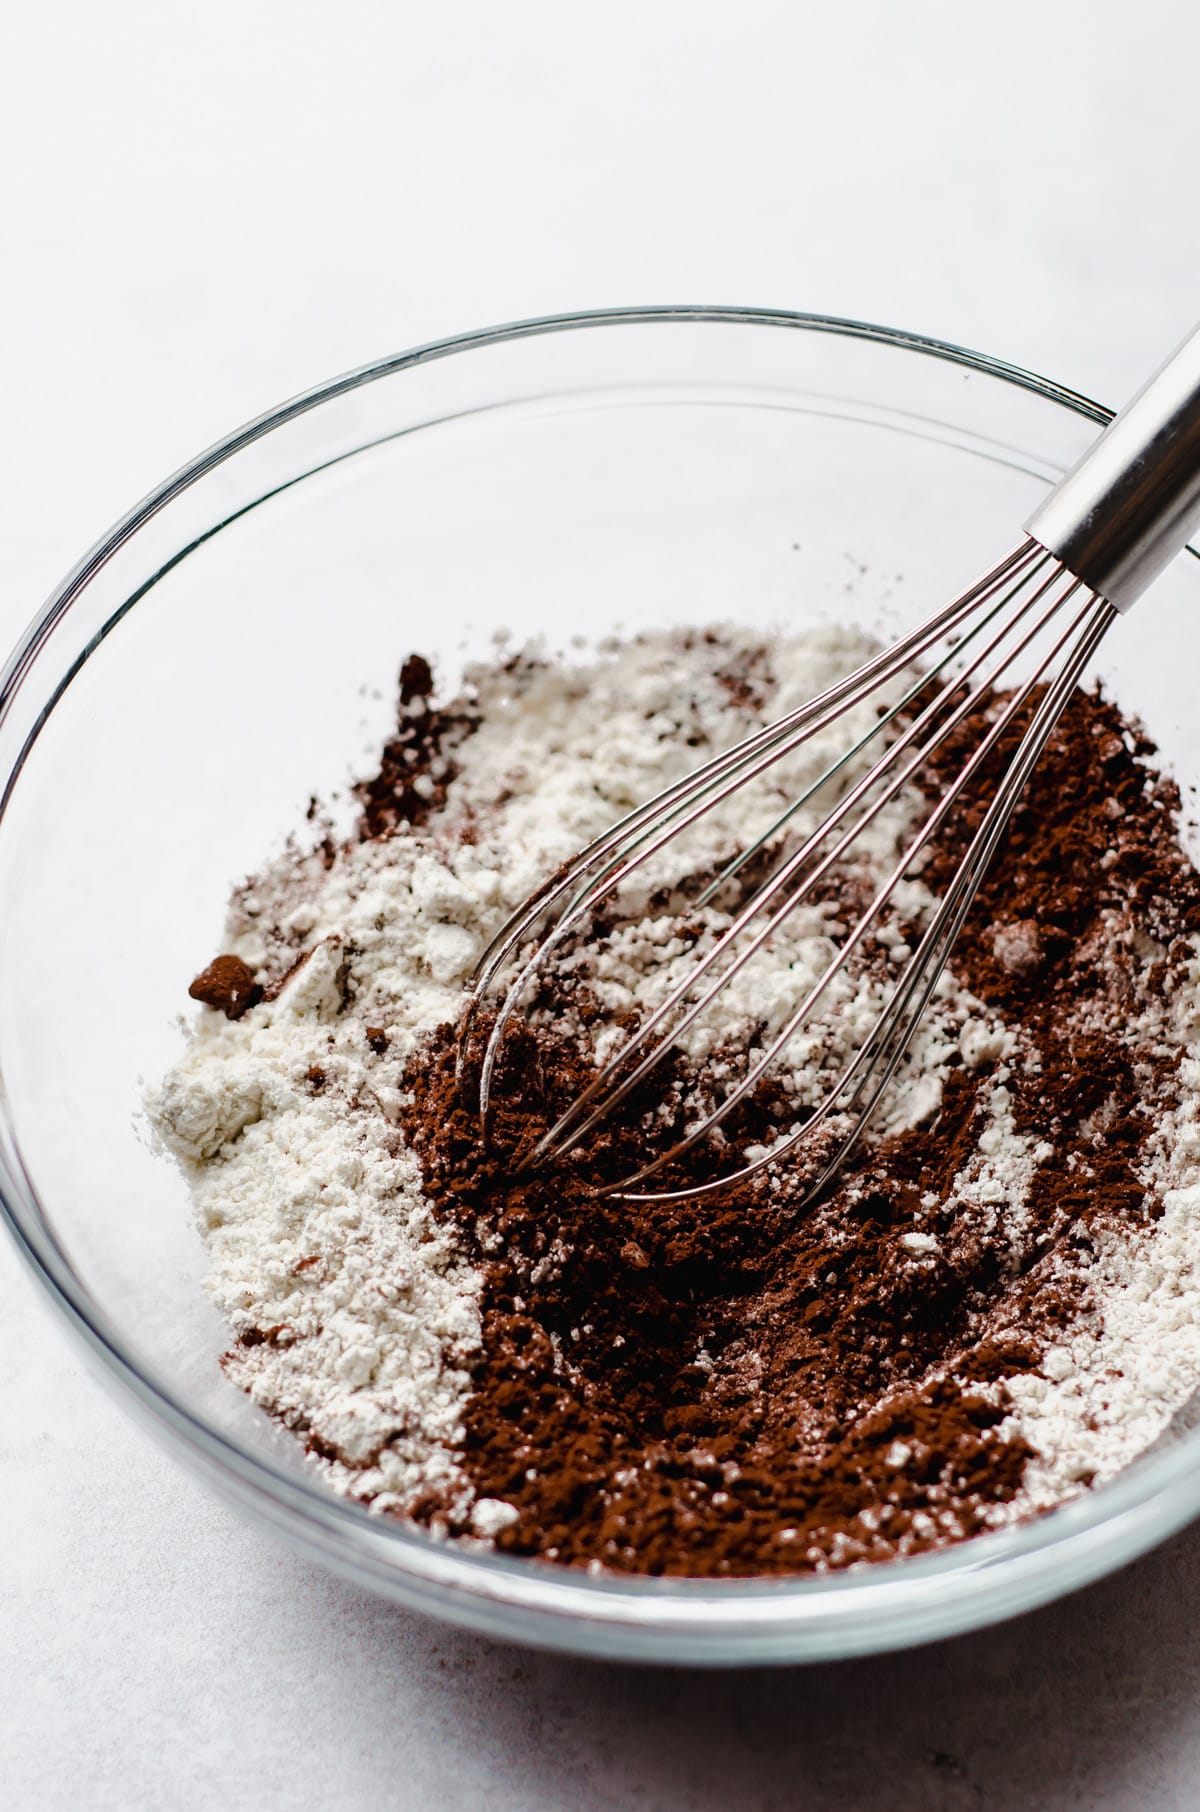 flour and cocoa powder in a glass bowl with a whisk